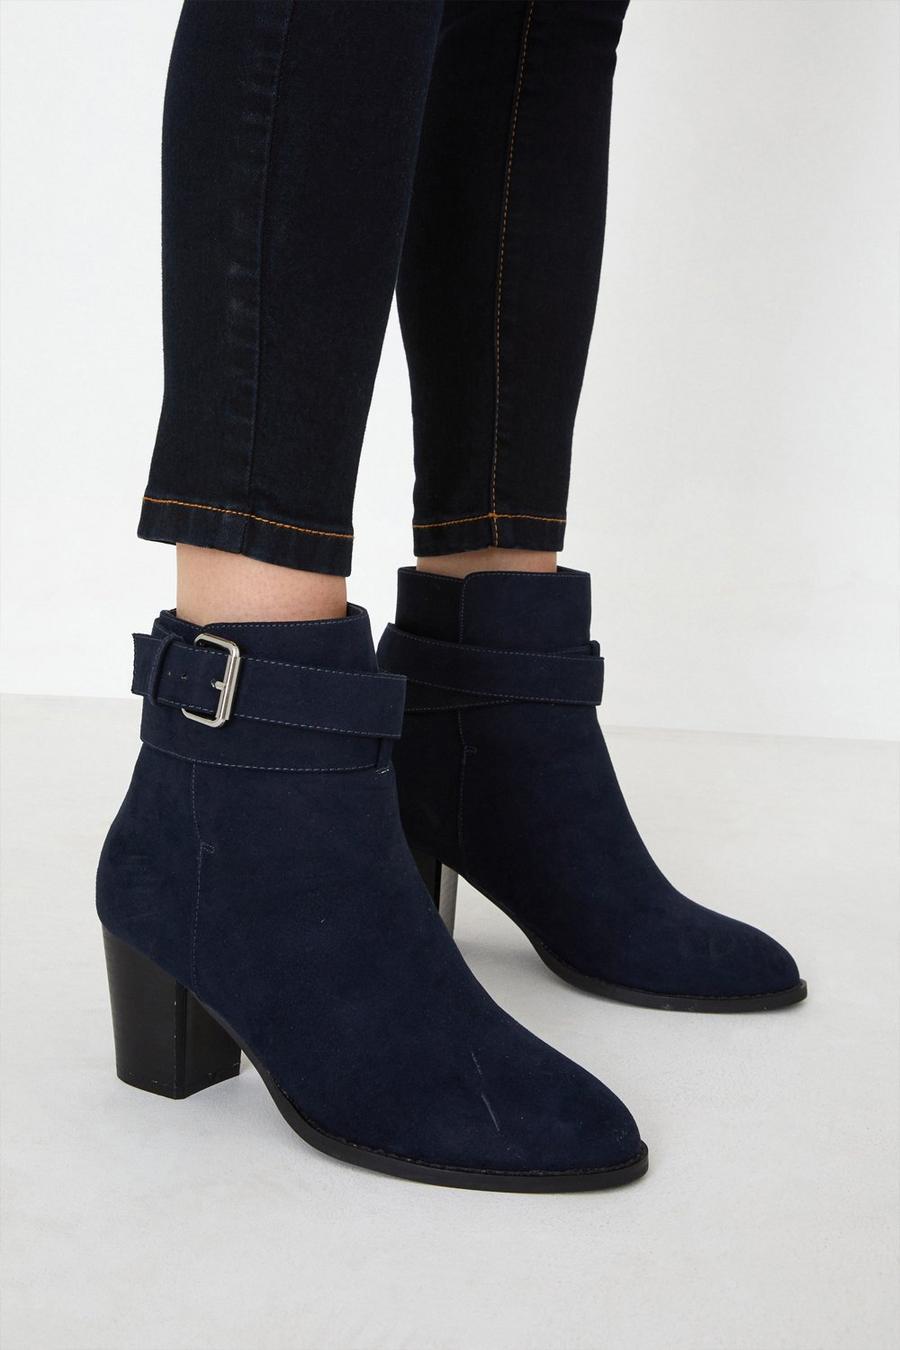 Autumn Cross Strapped Heeled Ankle Boots